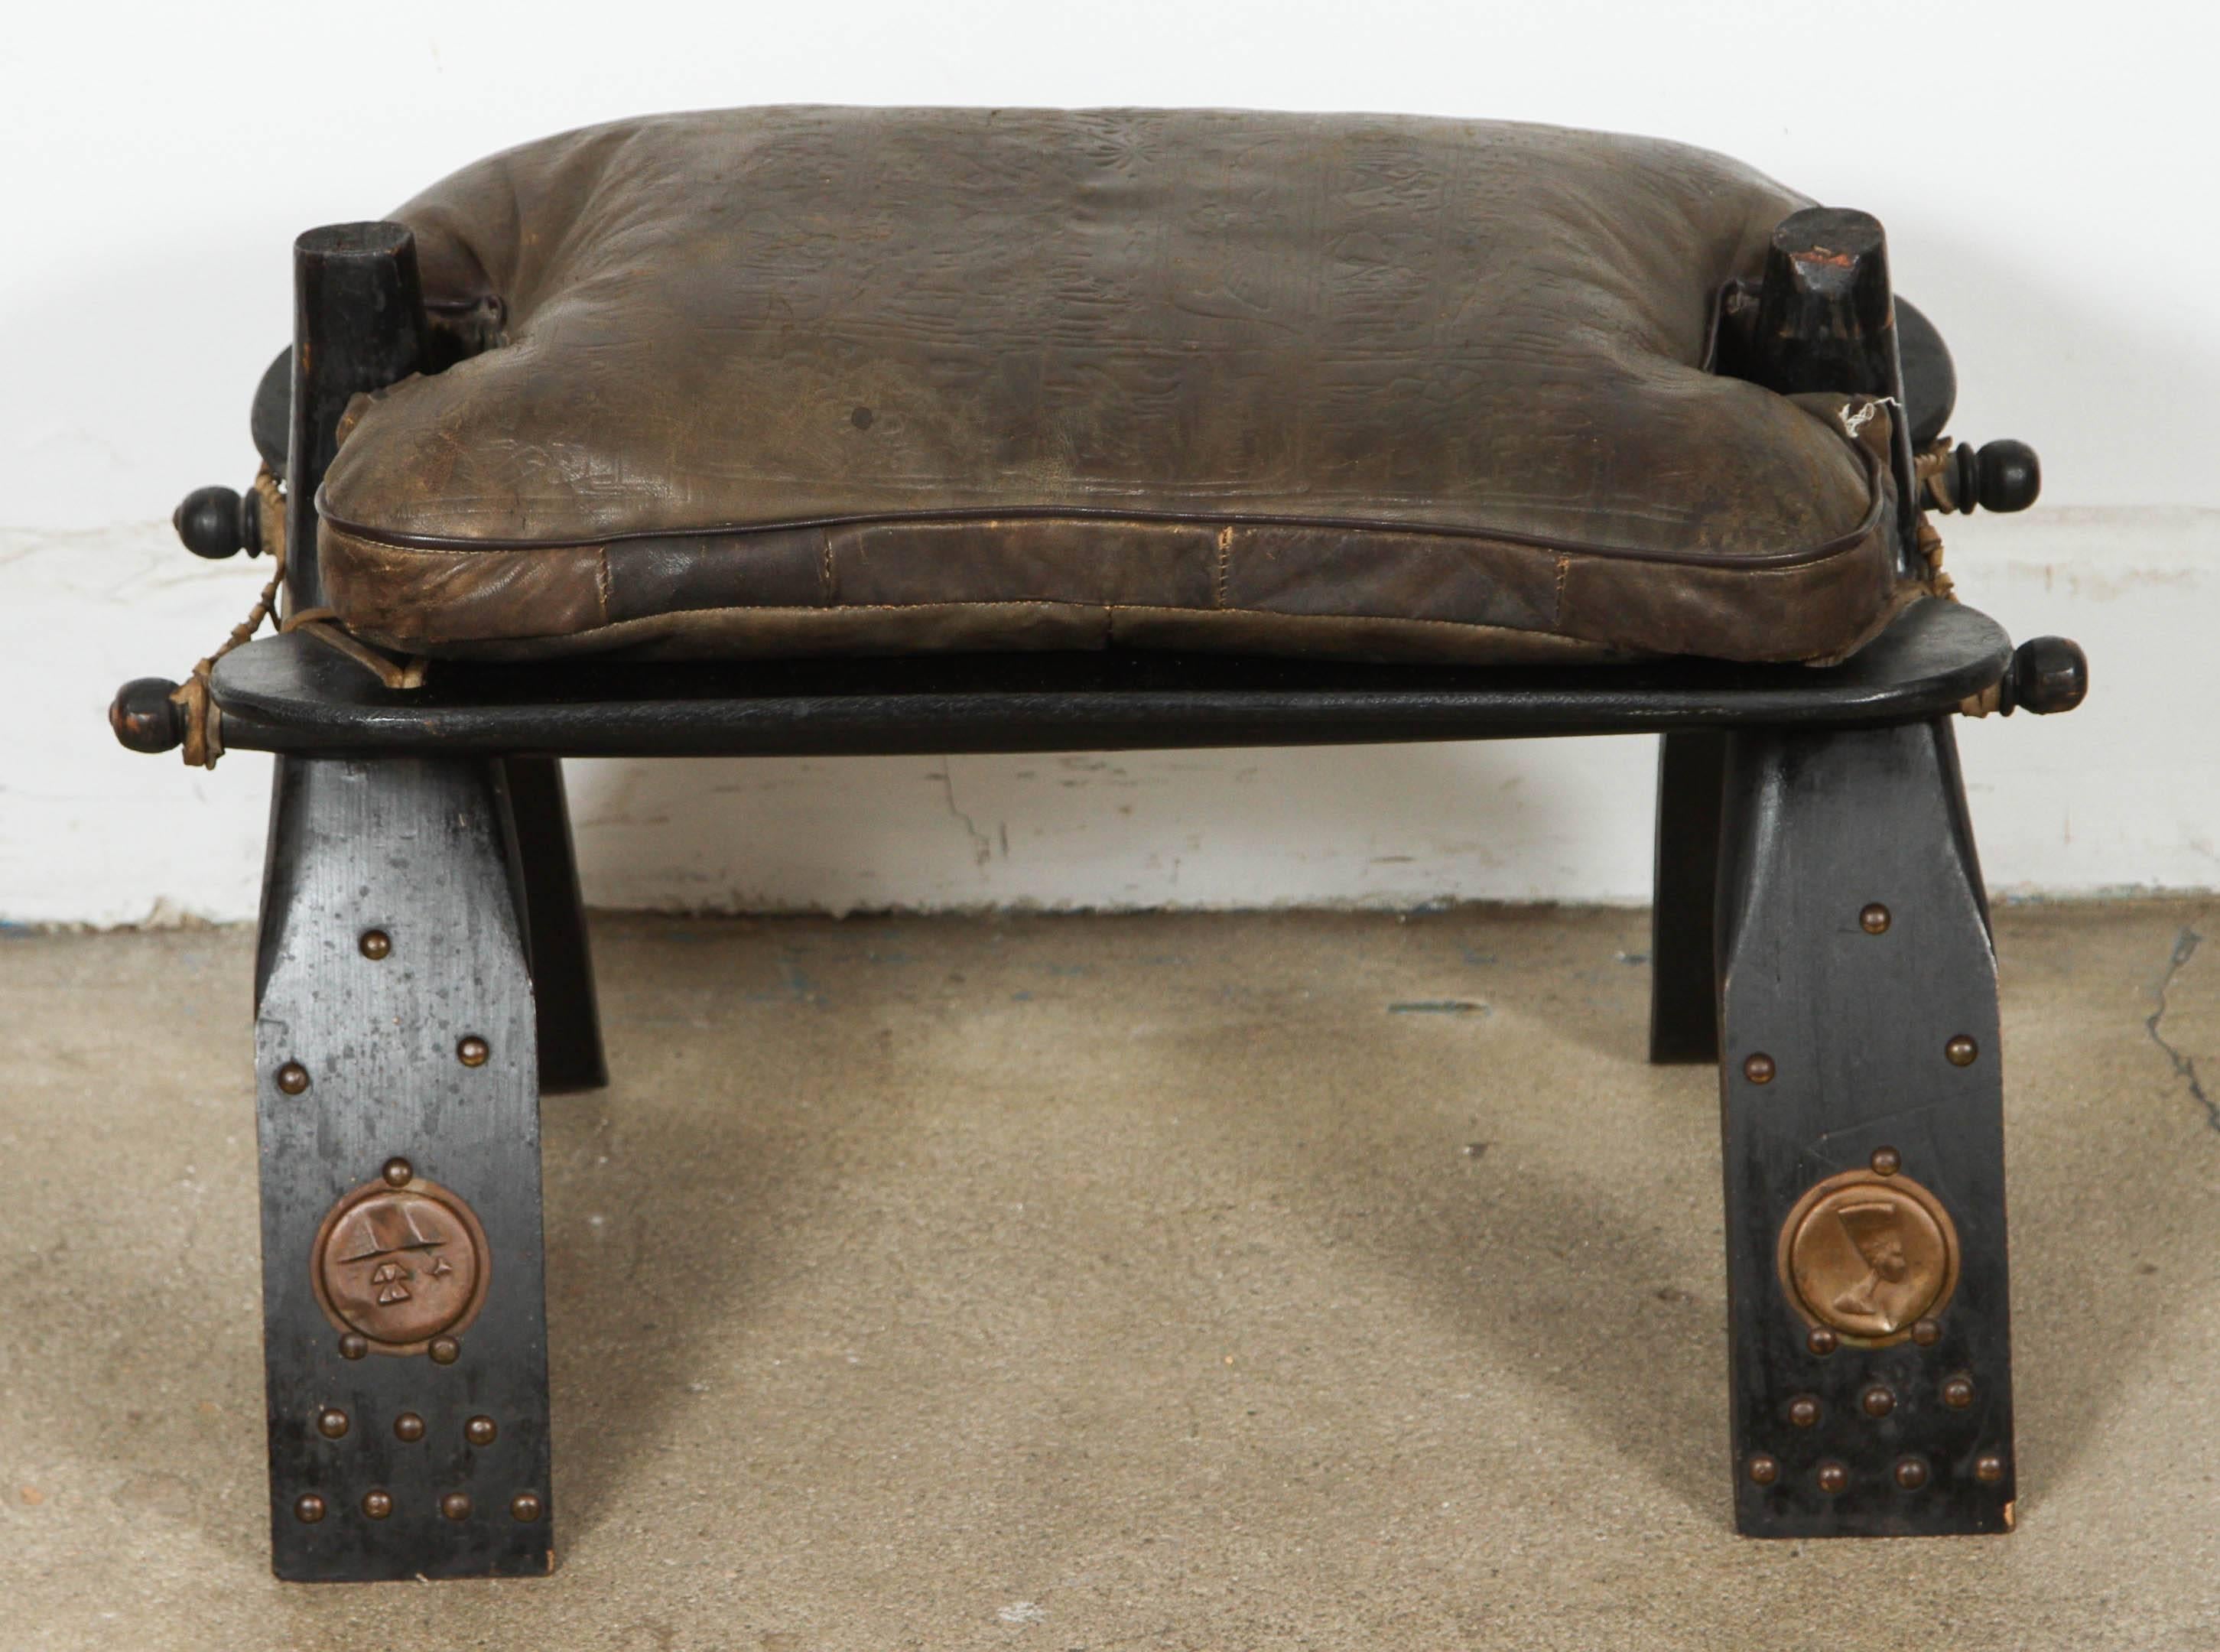 Traditionally used to ride camels in the desert, this camel saddle could be used as a foot stool or just as an accent piece in any room.
All hand-carved ebonized wood and adorned with brass nails and decoration with a black faux leather cushion.
 